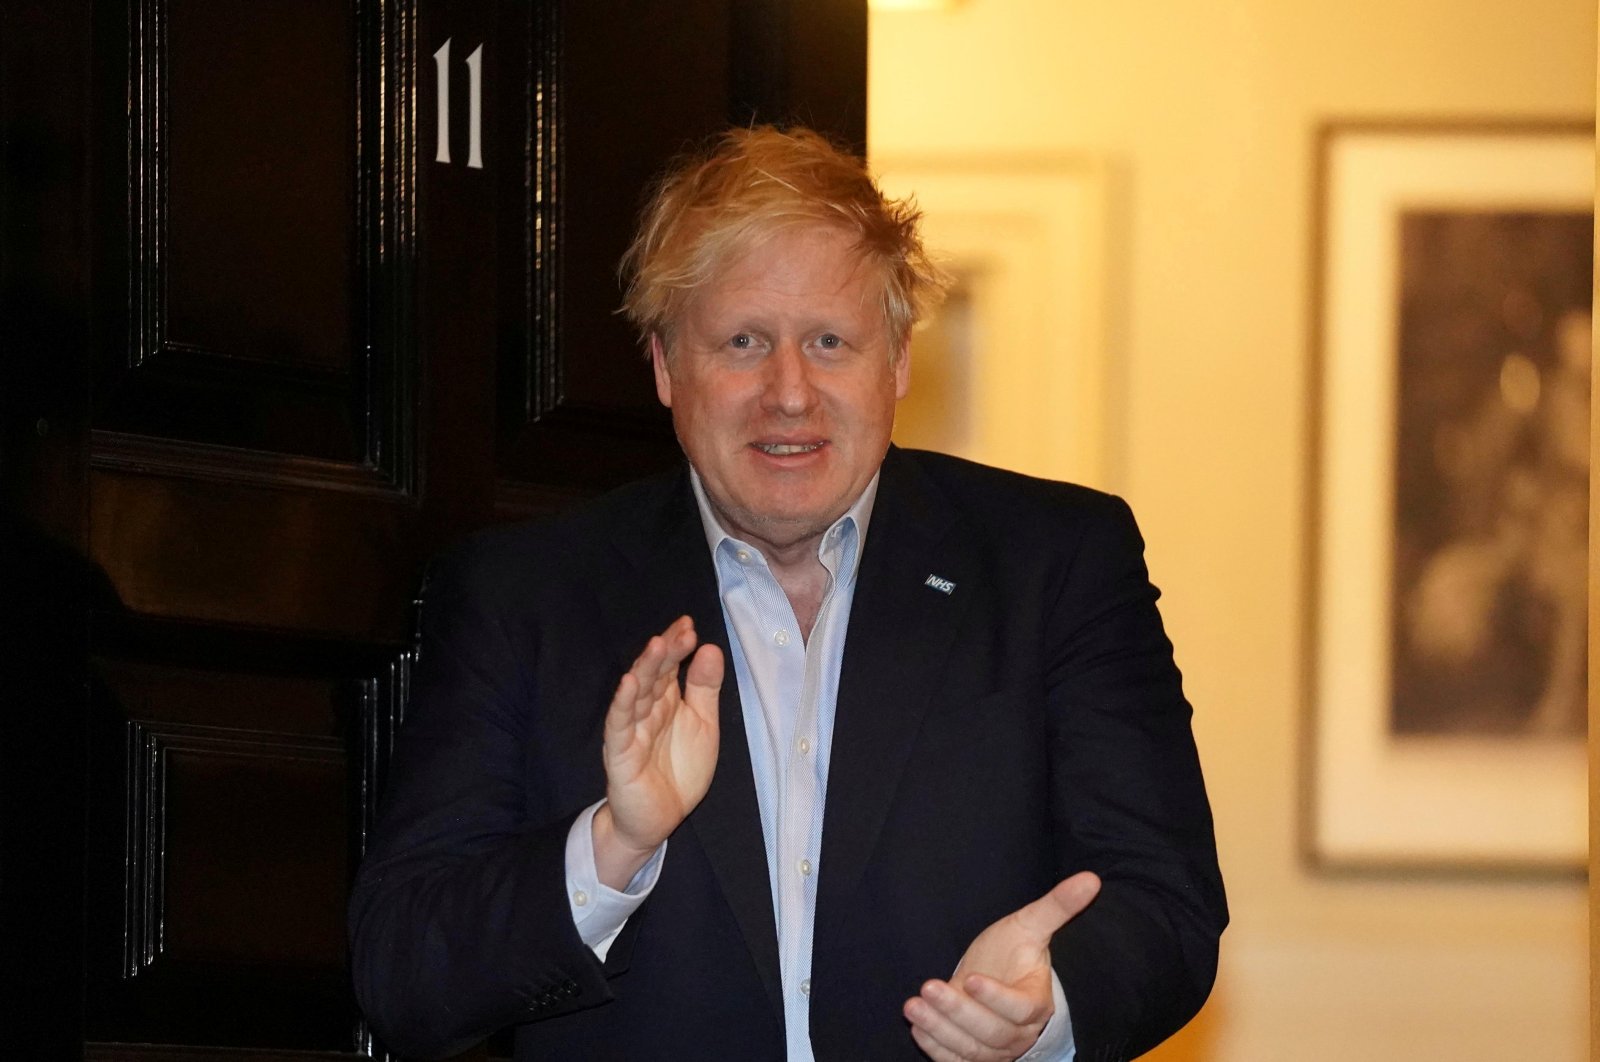 Britain's Prime Minister Boris Johnson applauds in support of the NHS during Clap for our Carers, outside 11 Downing Street in London, Britain, Thursday, April 2, 2020. (Reuters Photo)